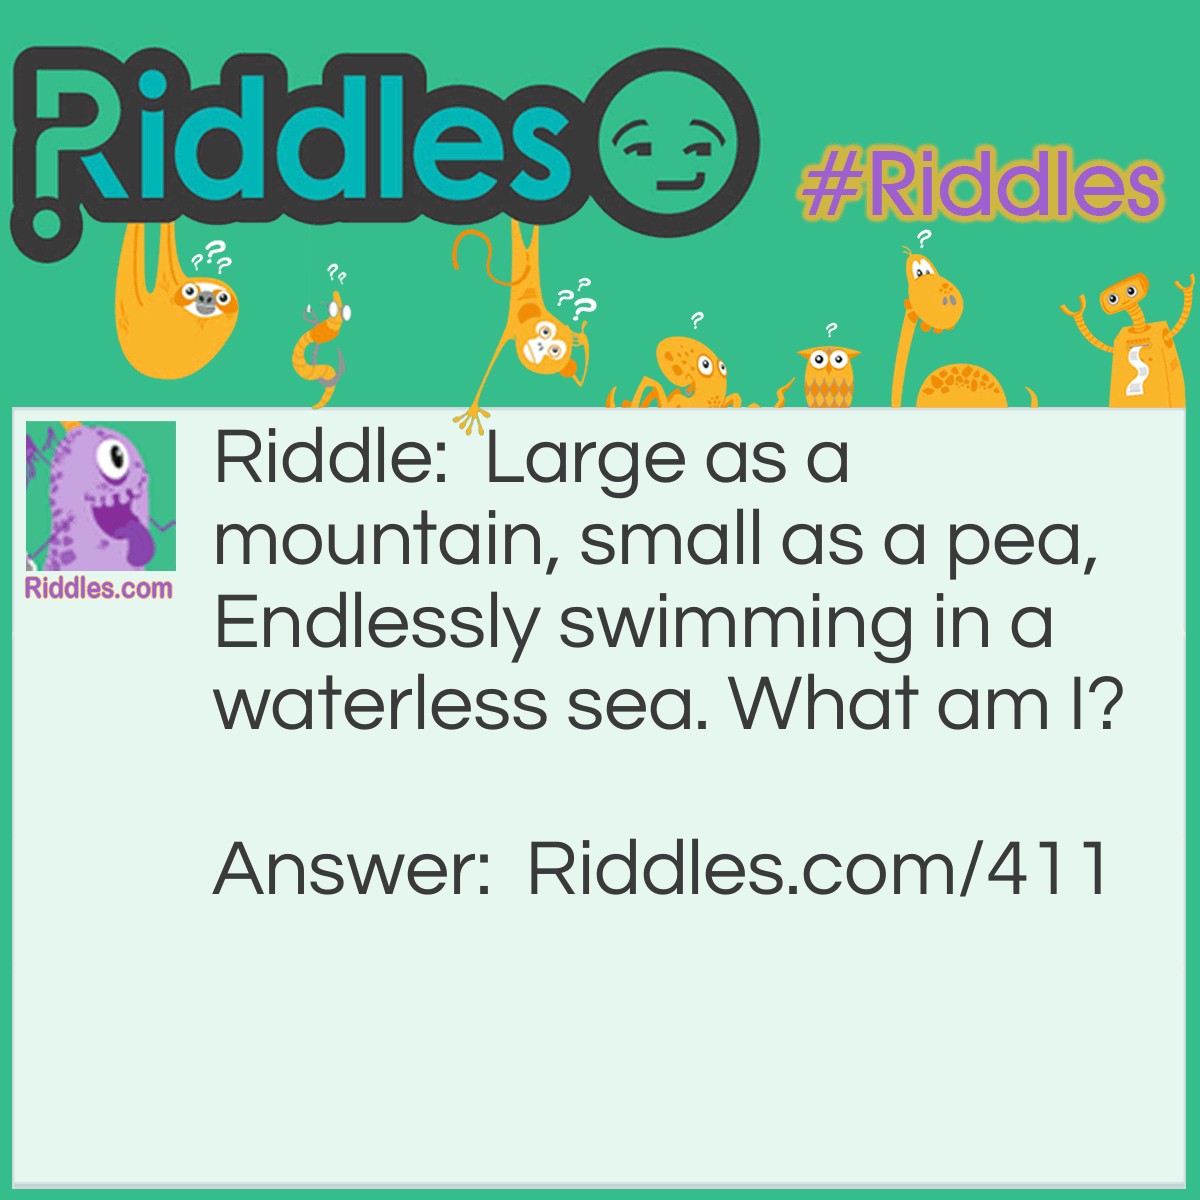 Riddle: Large as a mountain, small as a pea, 
Endlessly swimming in a waterless sea. 
What am I? Answer: Asteroids.